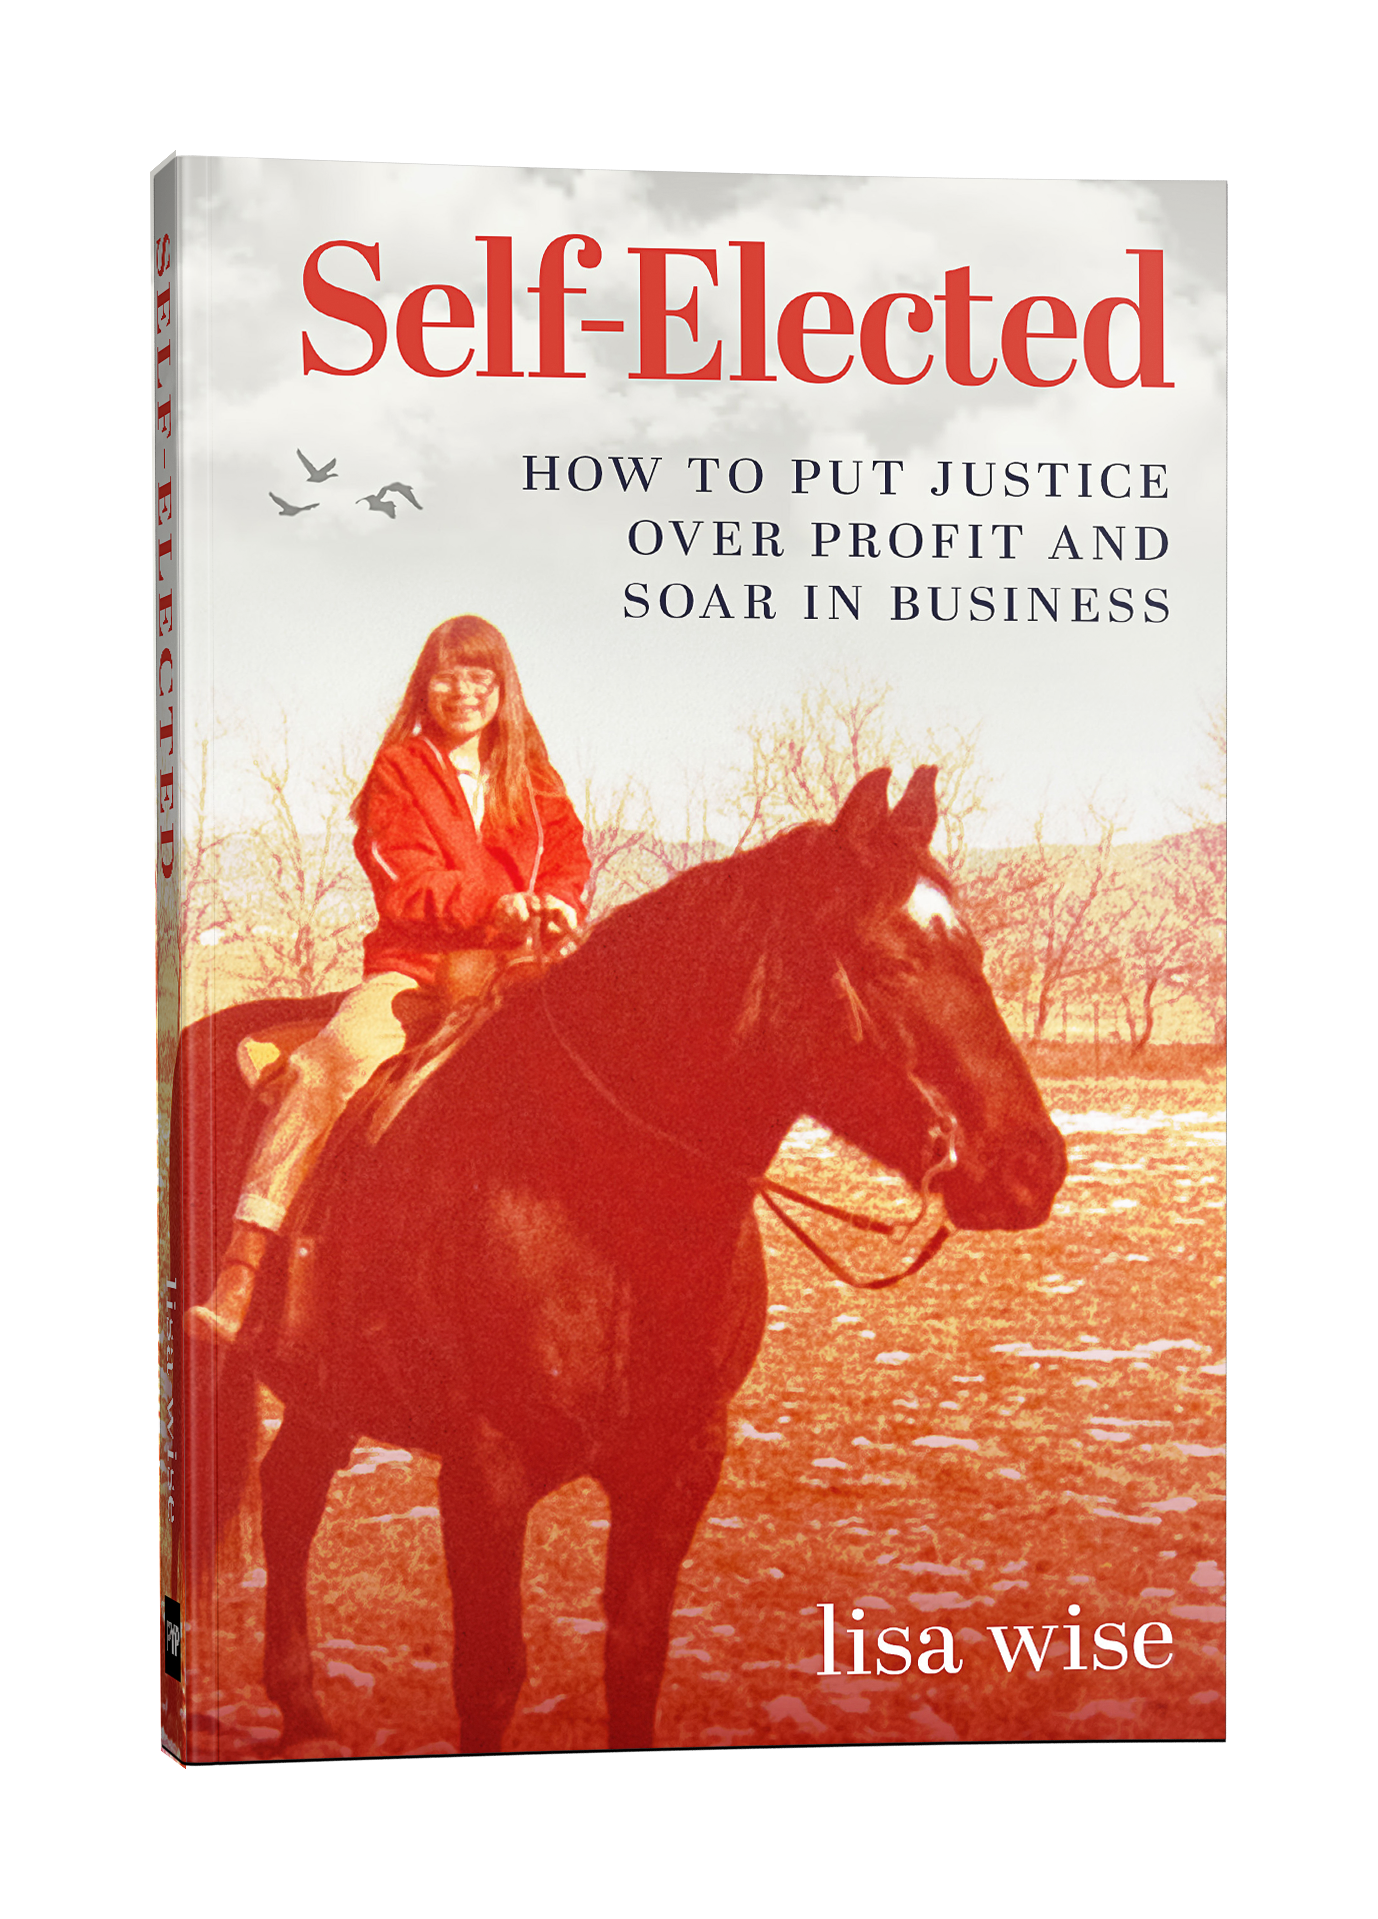 Self-Elected: How to Put Justice Over Profit and Soar in Business by lisa wise